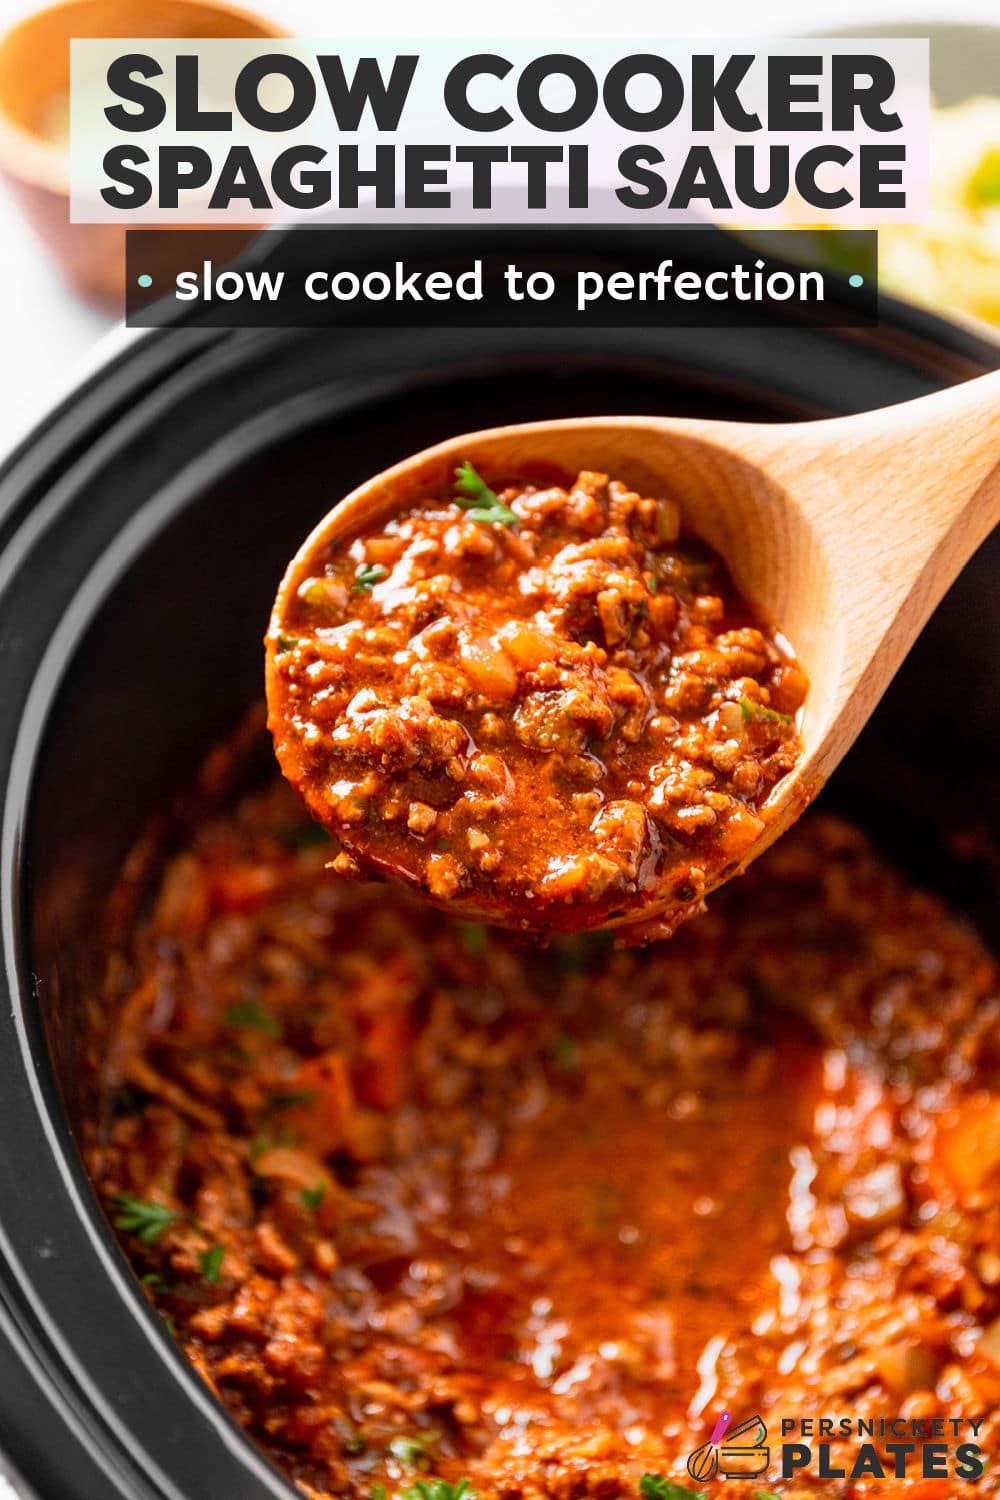 This family favorite slow cooker spaghetti sauce is made with simple ingredients and without the need to watch over a simmering pot. The slow-cooked beef and veggies makes a thick and rich sauce that is perfect over your favorite pasta noodles! | www.persnicketyplates.com